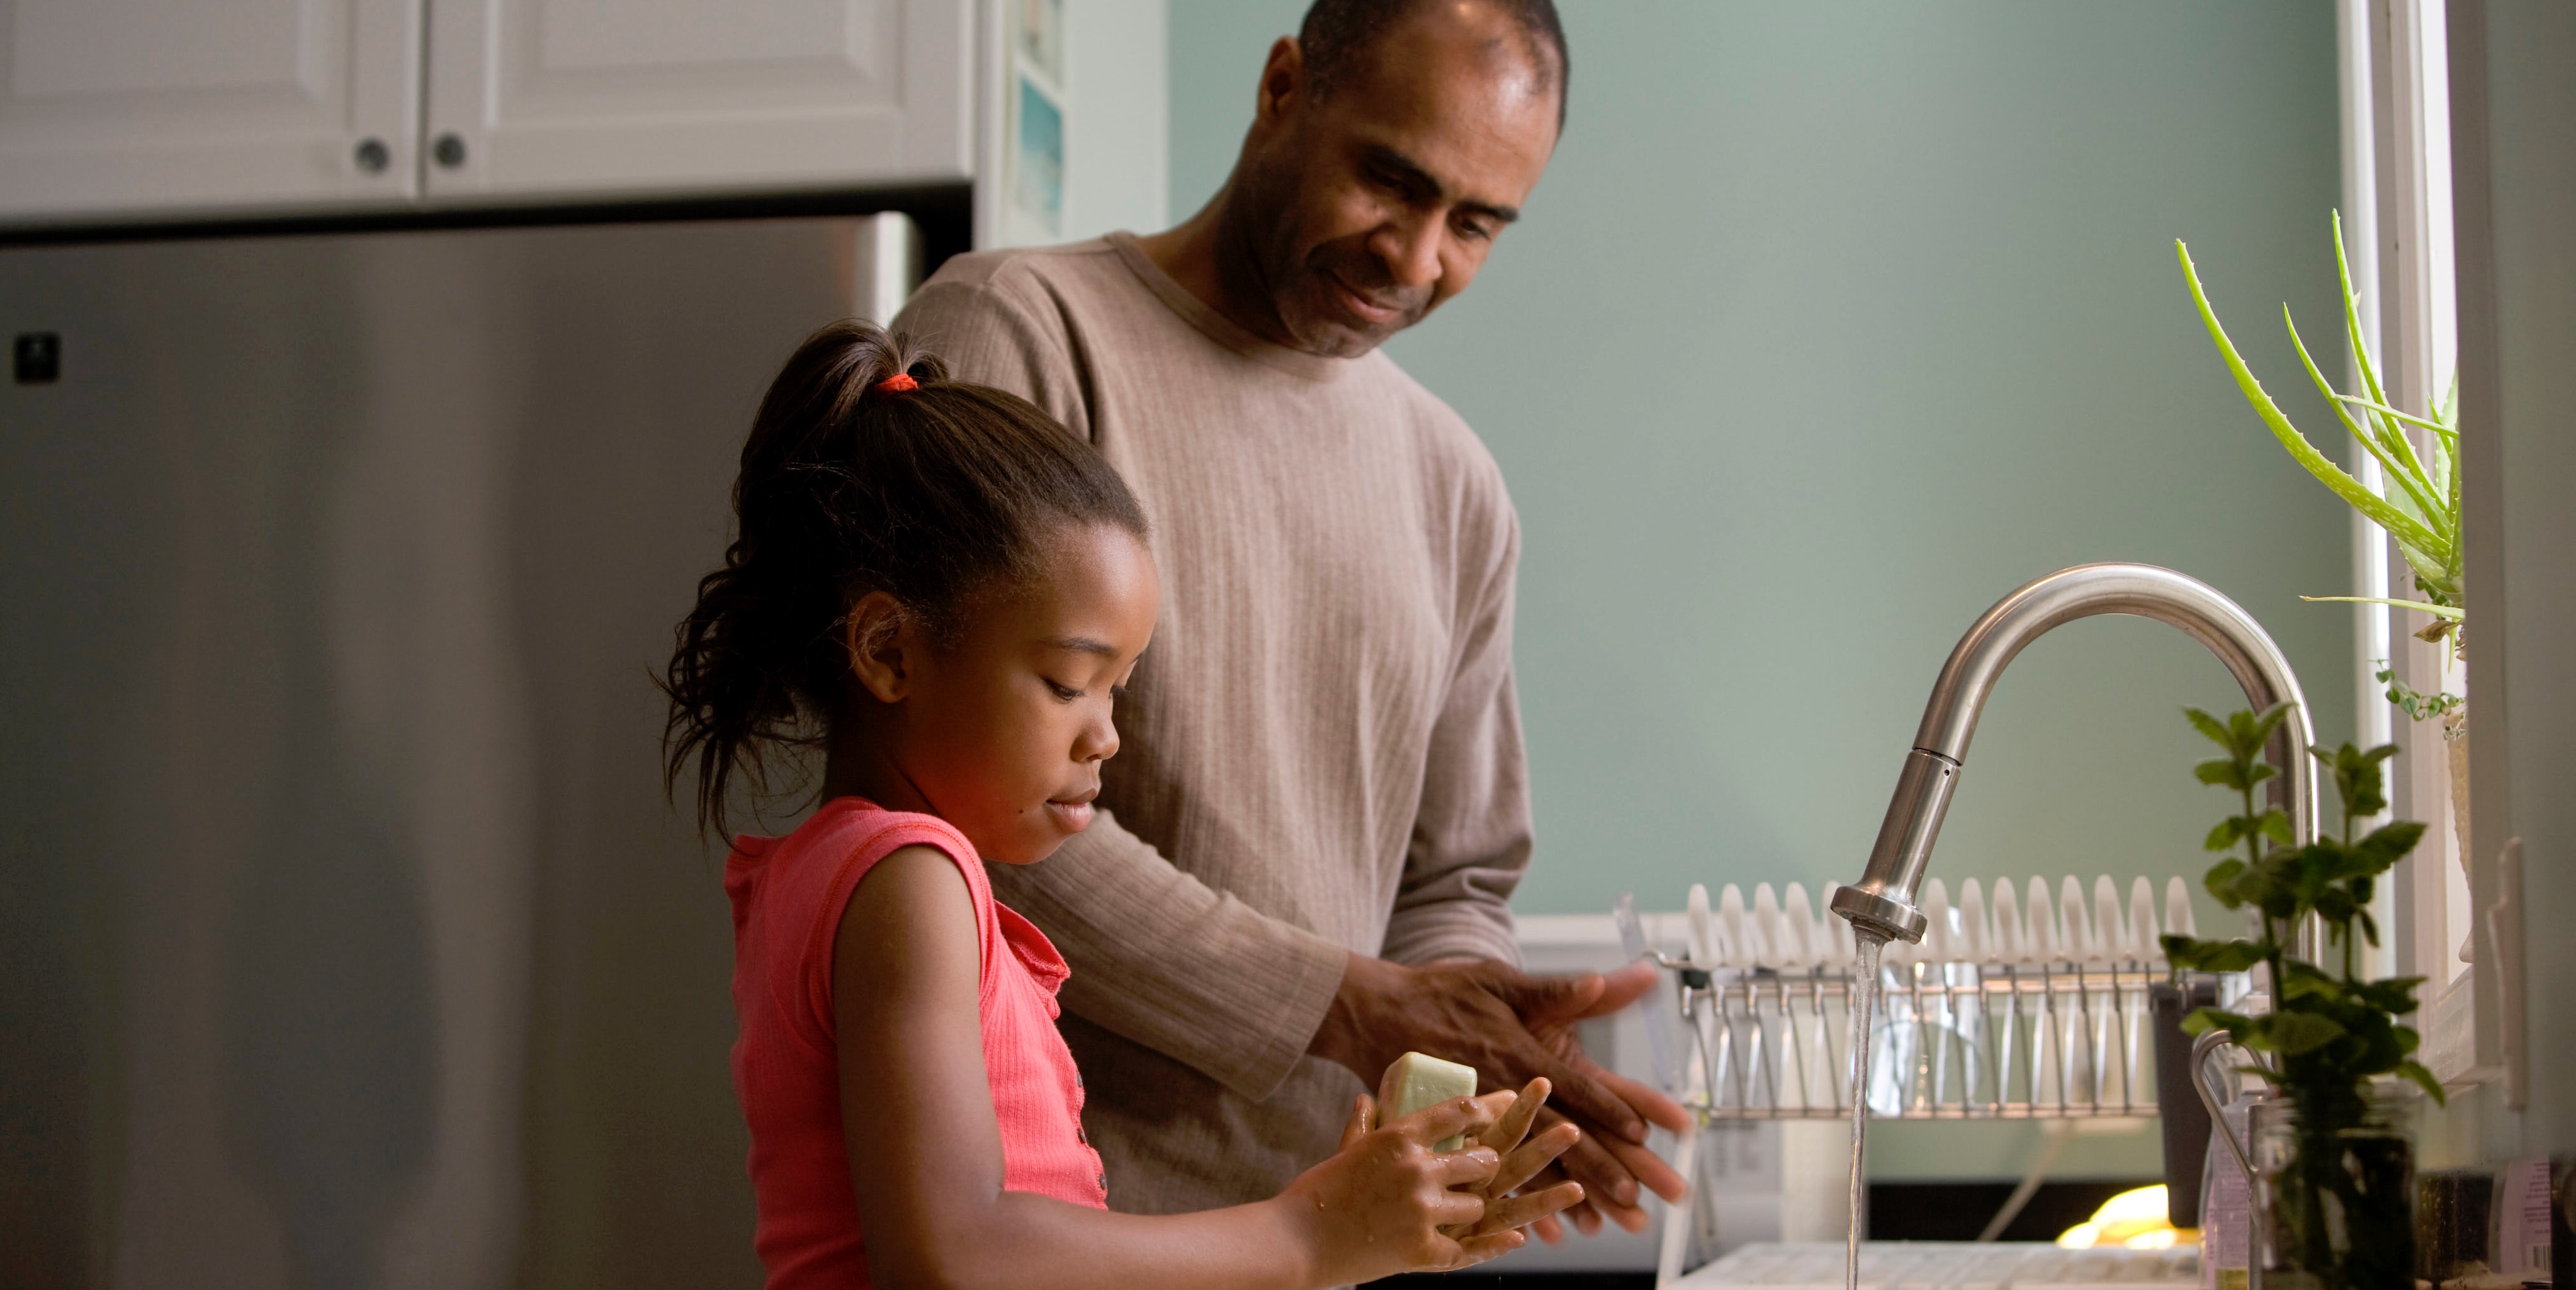 A man and his daughter practice washing their hands at the sink.